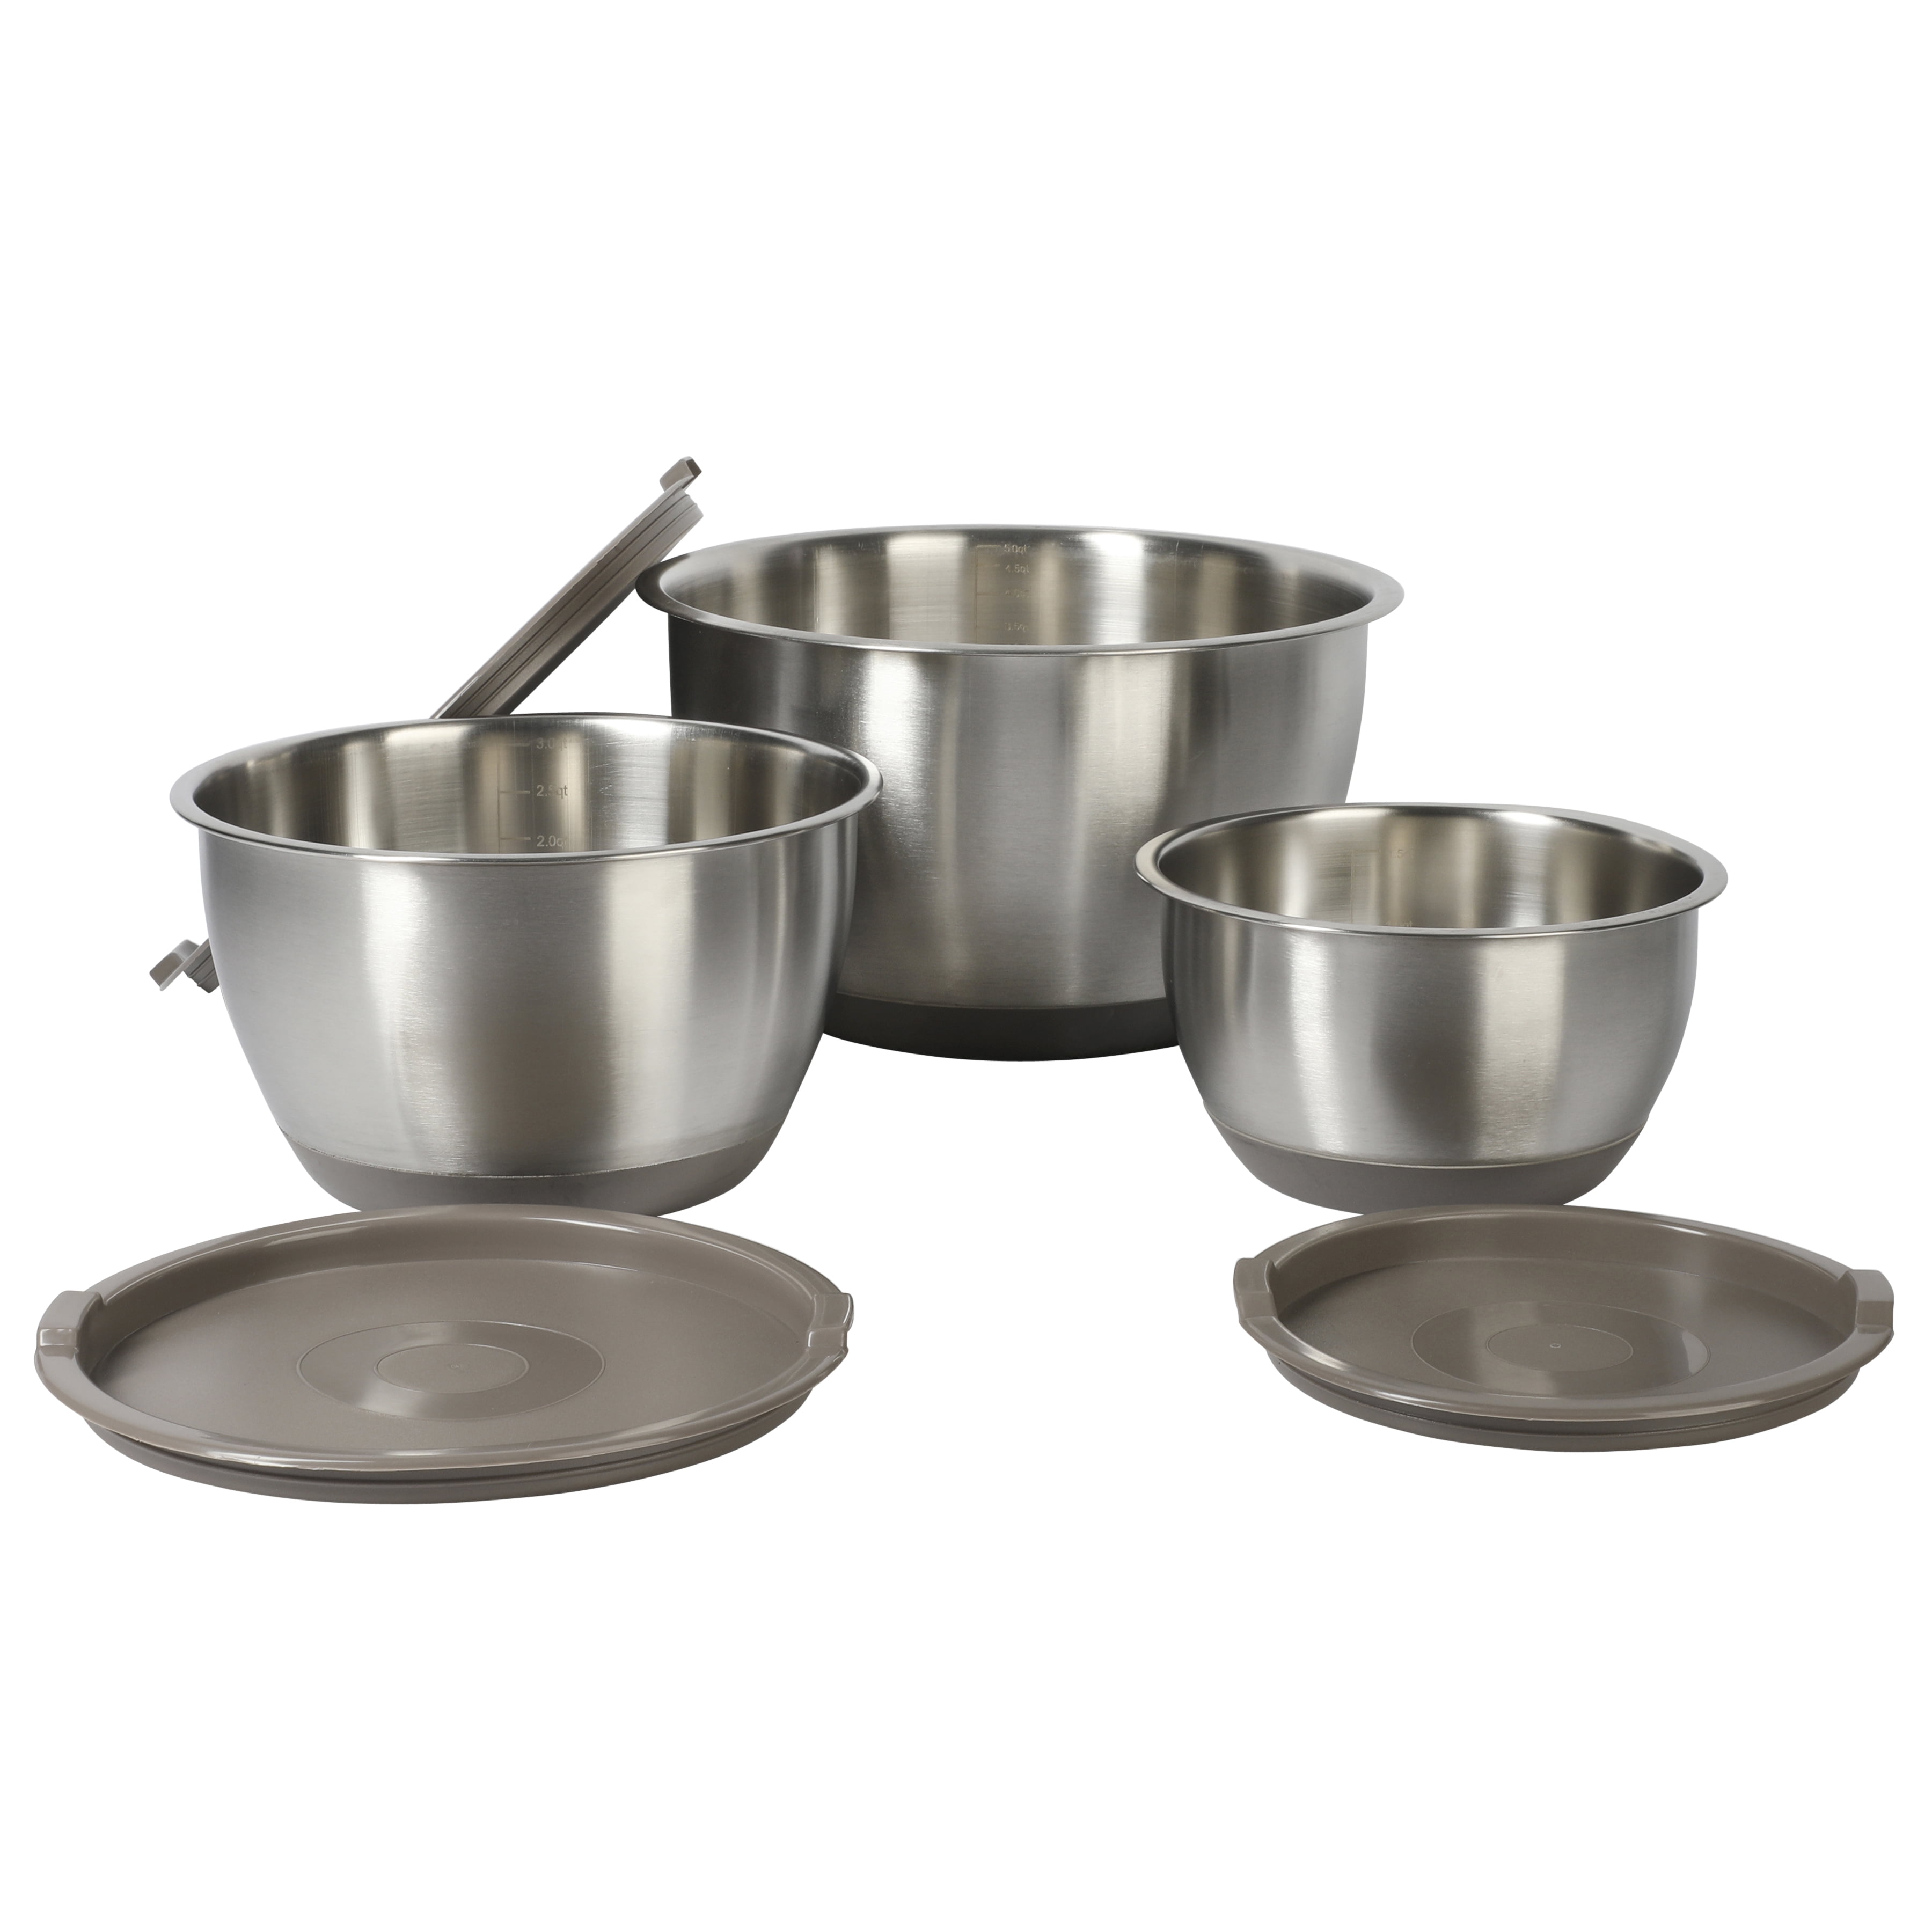 MARTHA STEWART Rhinewell Mirror Polish 6 Piece Stainless Steel Mixing Bowls  with Lid and Non-Slip Base - Grey